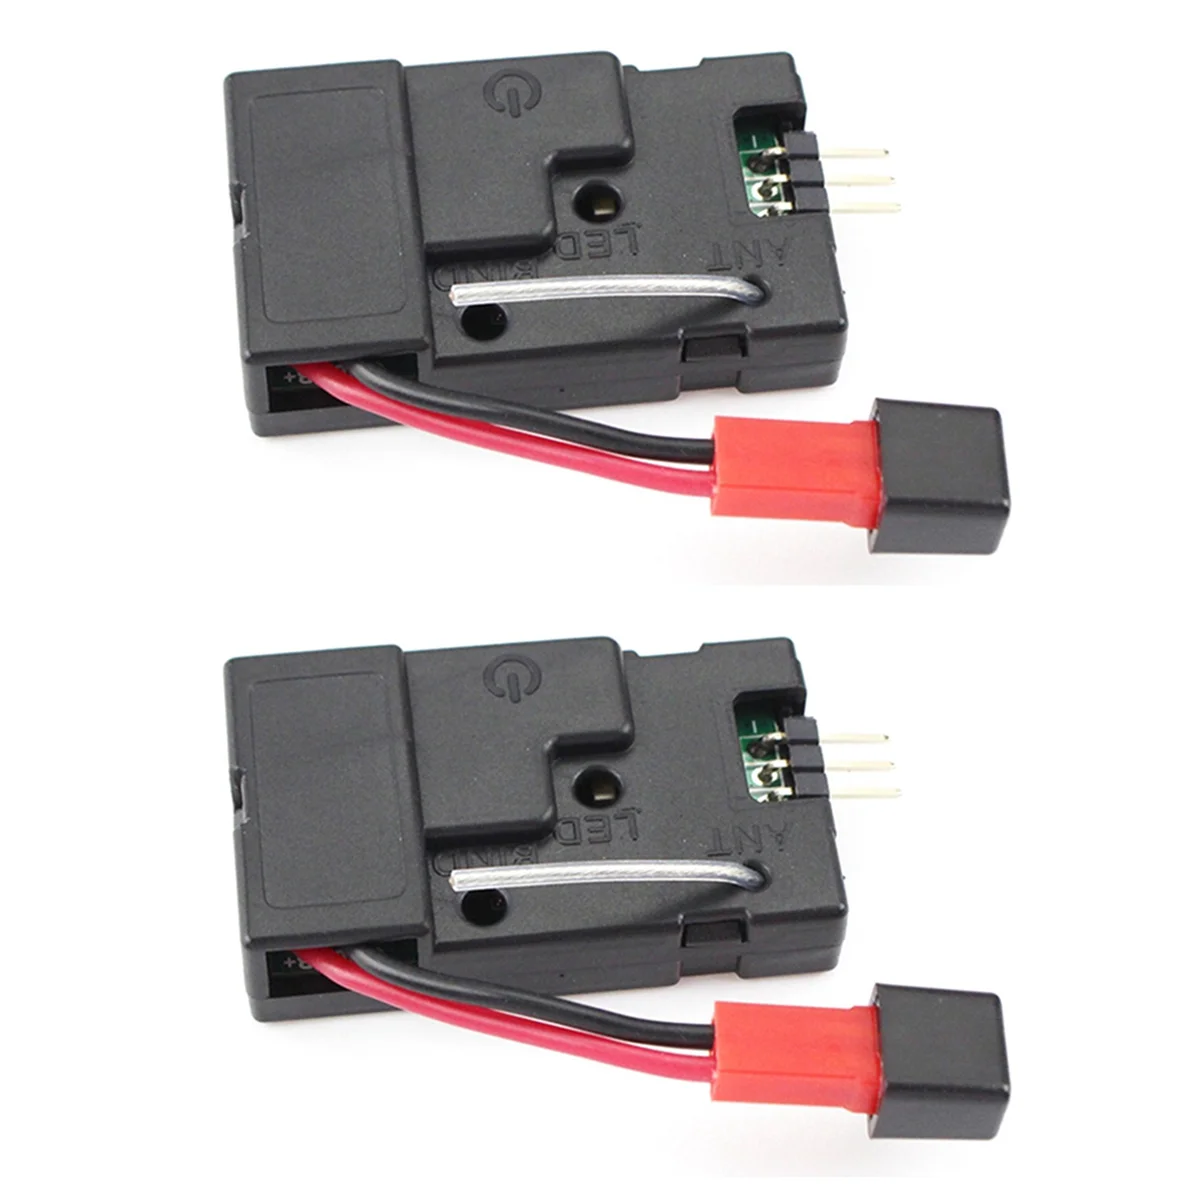 

2X New Version 3 in 1 Electric Receiver Board Receiving Circuit Board K989-52 for Wltoys K969 K989 1/28